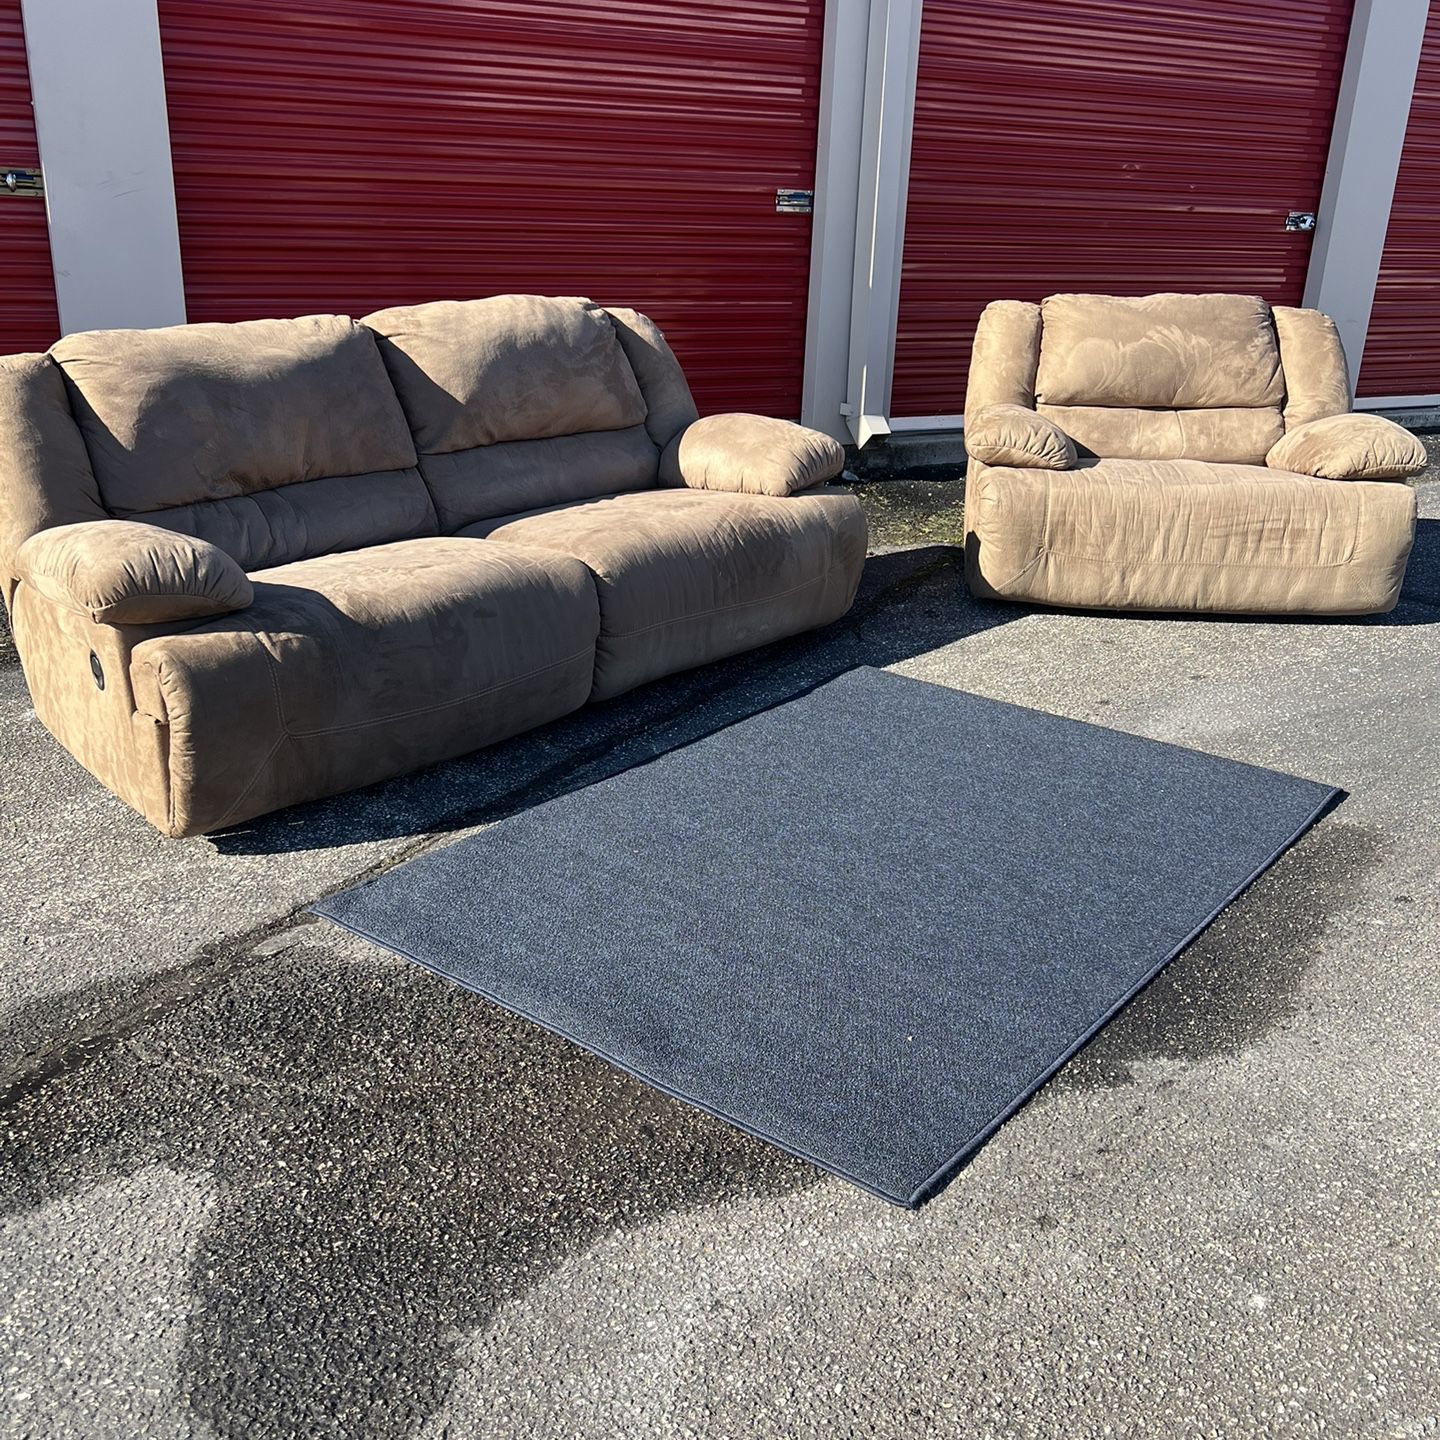 *FREE DELIVERY* Sofa And Chair Recliner Set